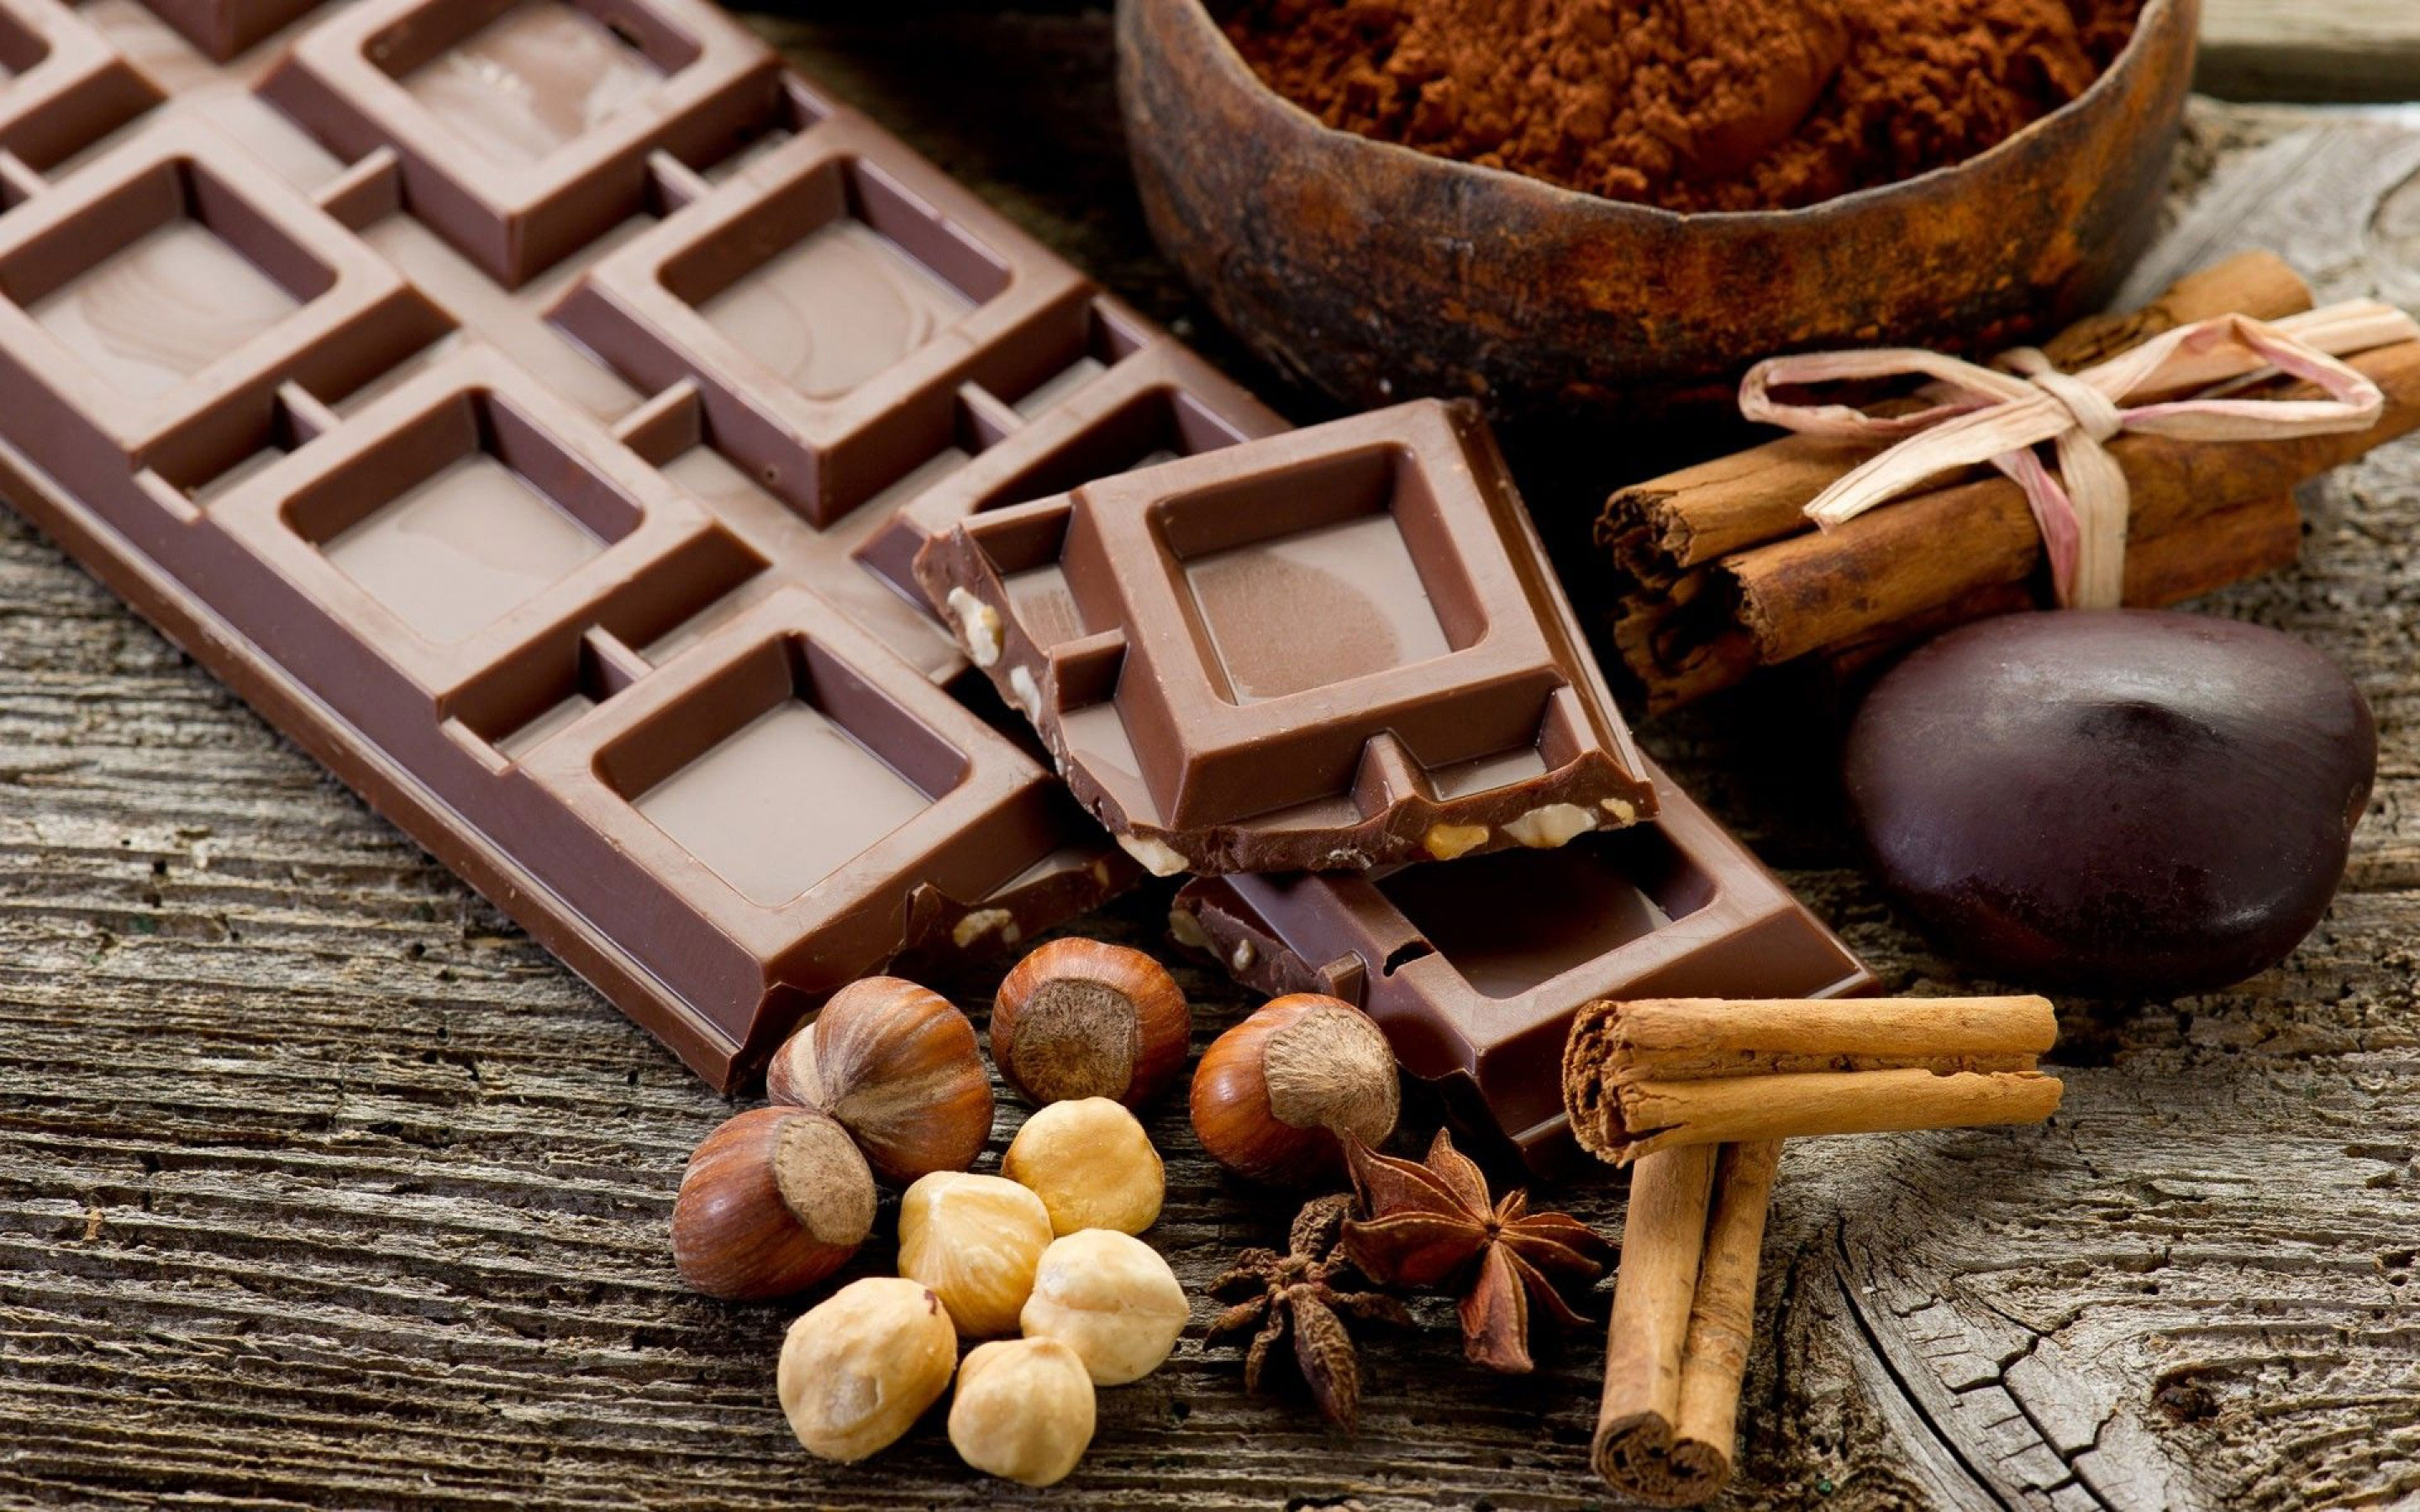 Happy Chocolate Day – Gifts & New HD Wallpaper for Chocolate Day